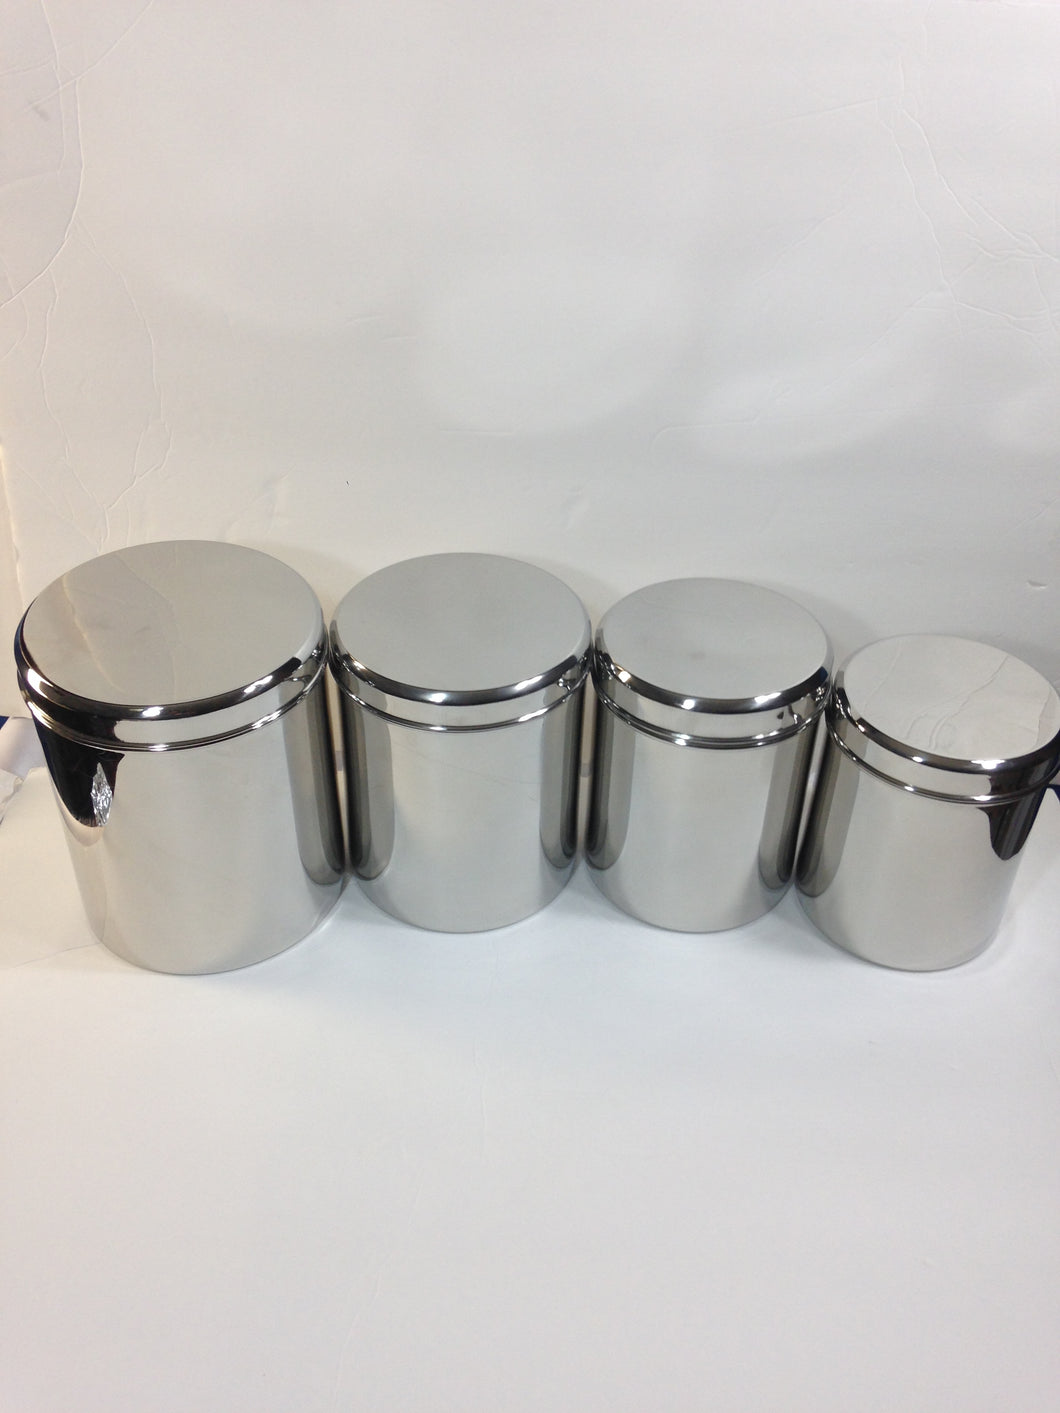 Cooks Standard 4-Piece Stainless Steel Canister Set